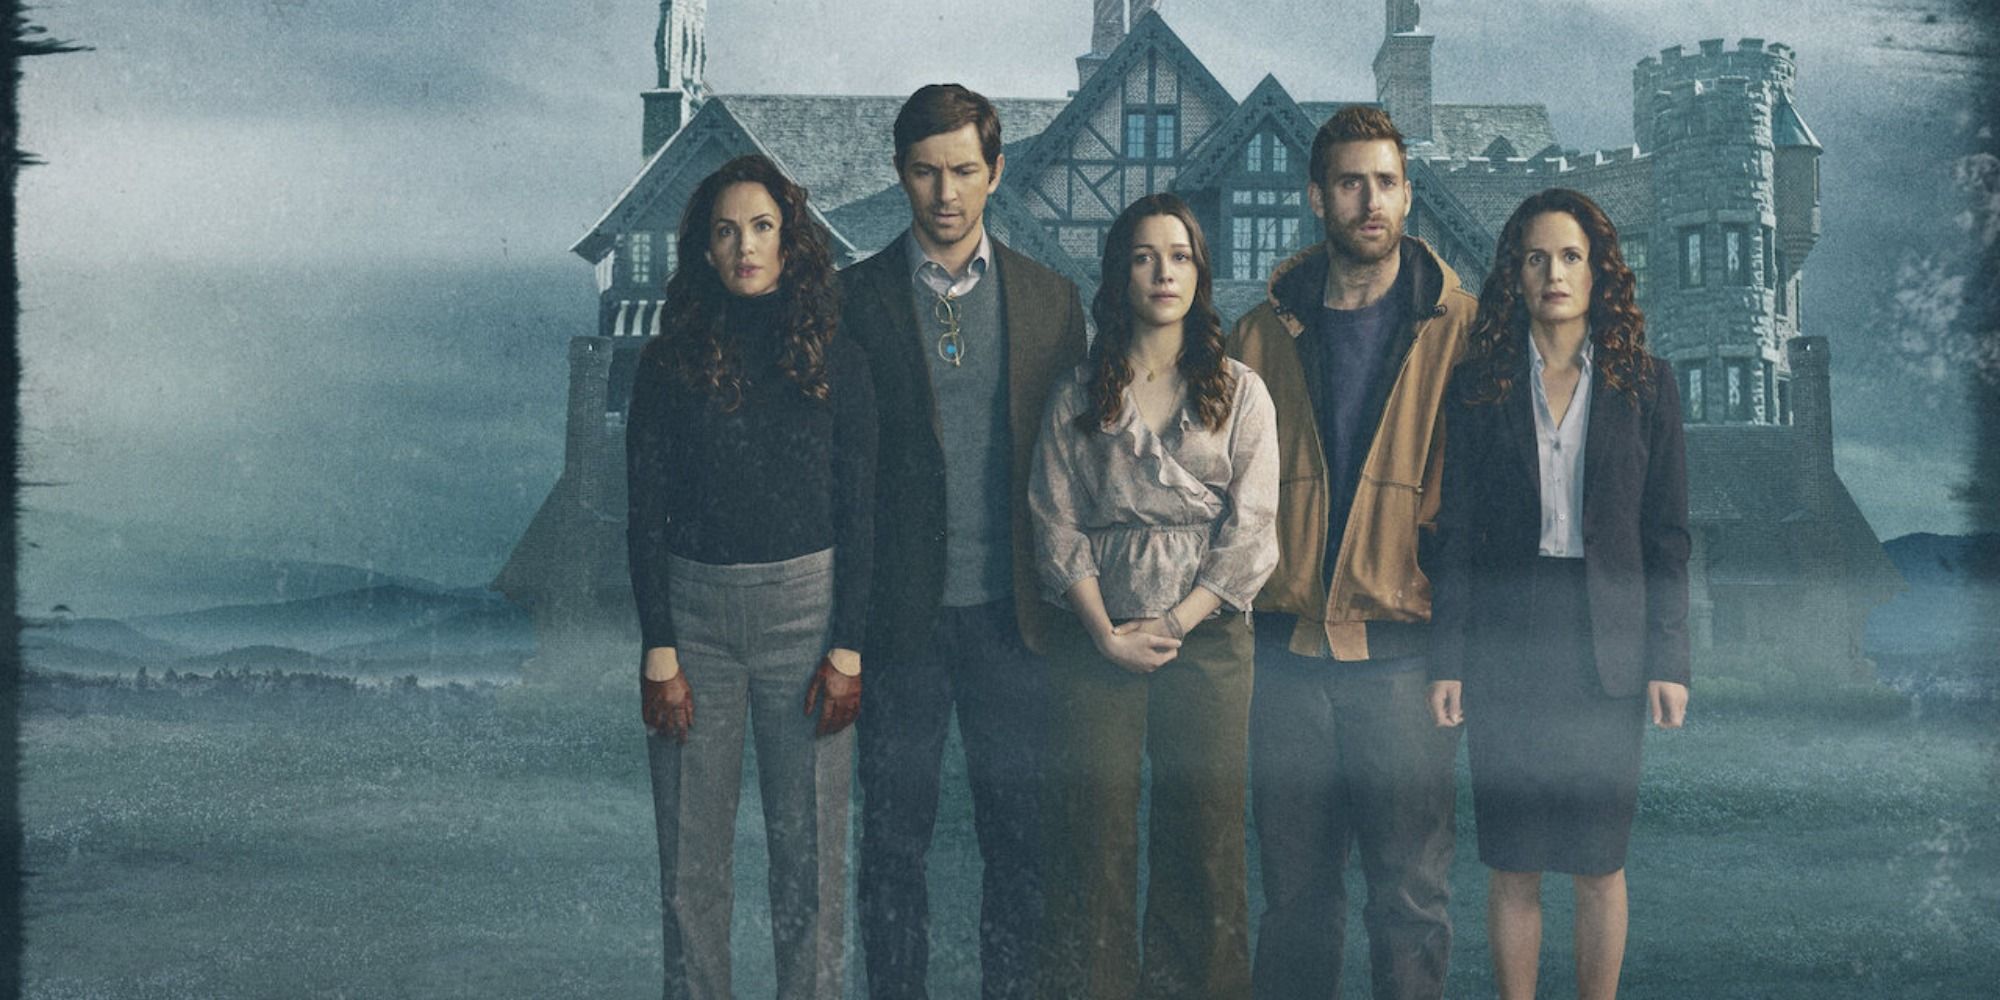 TV show The Haunting of Hill House